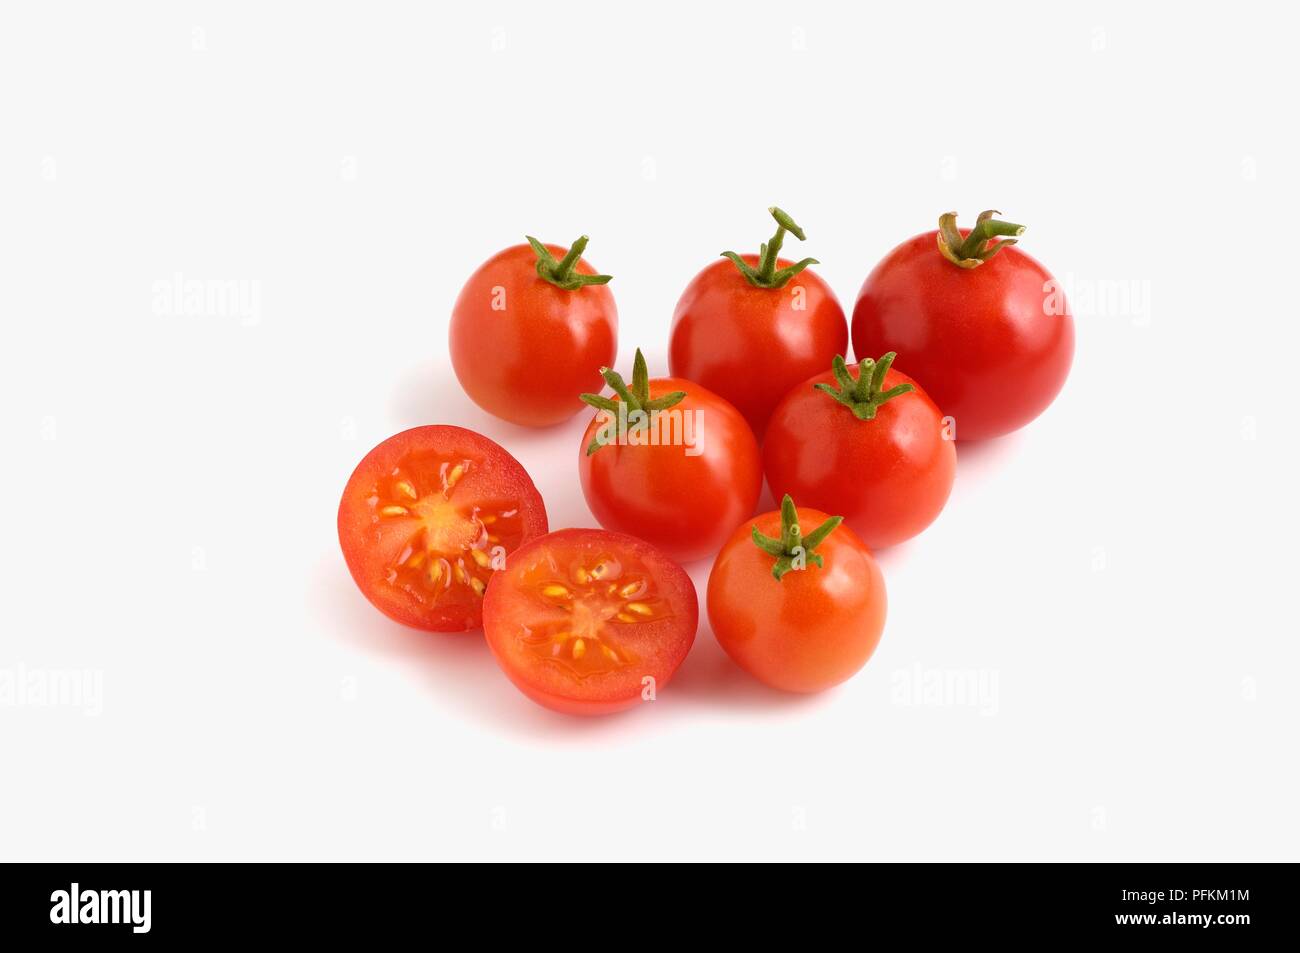 Whole and sliced Tomatoes 'Tiny Tim' Stock Photo